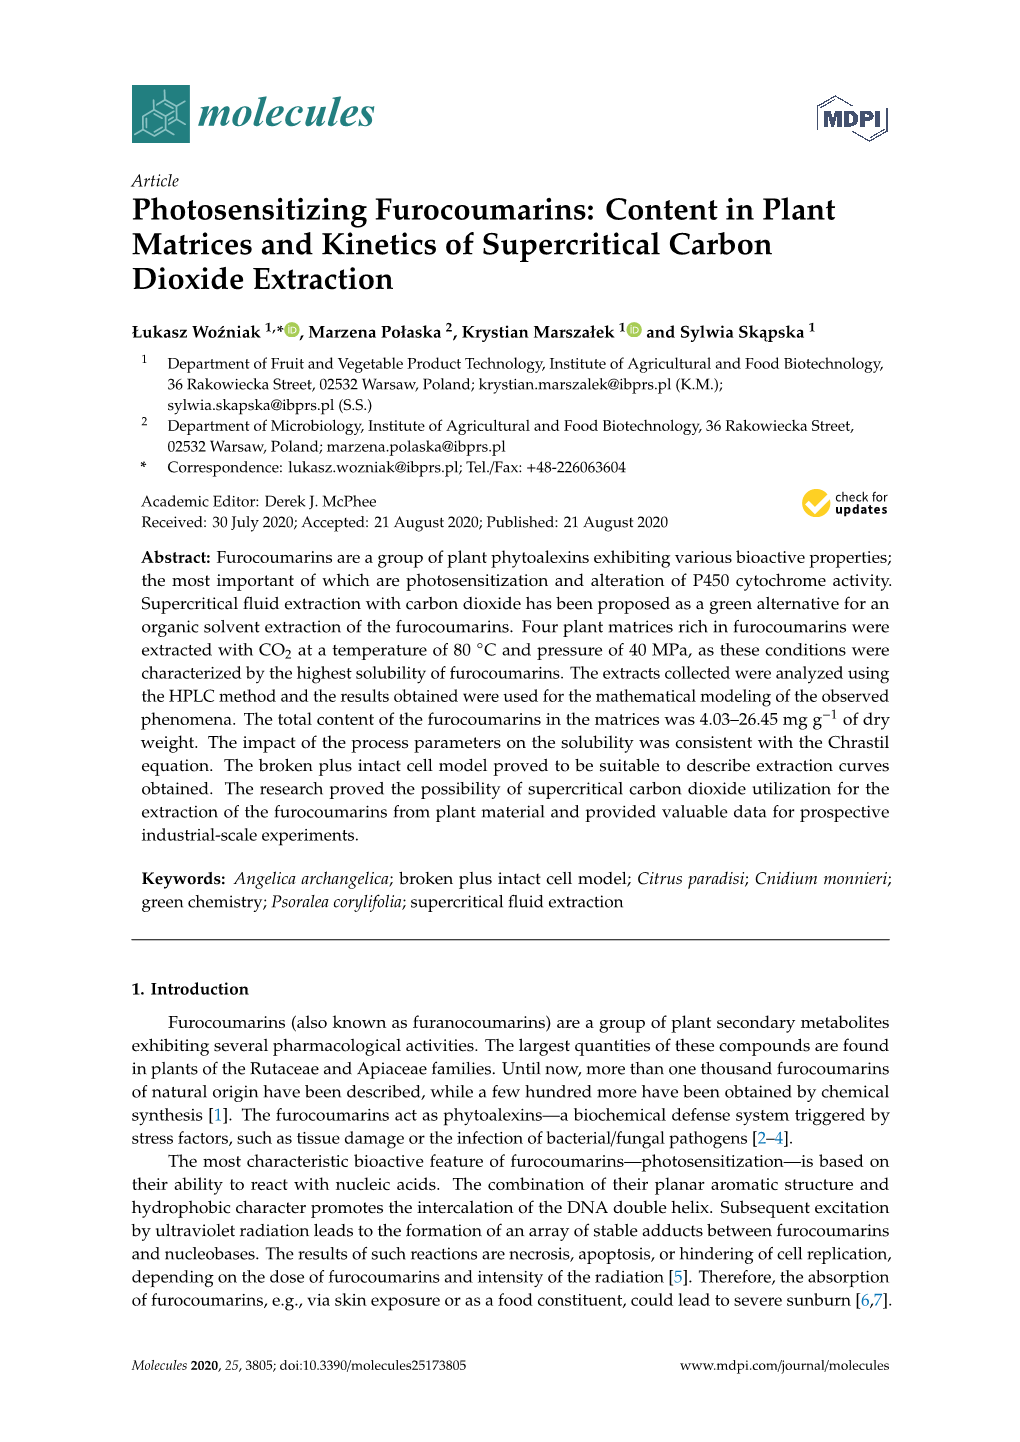 Content in Plant Matrices and Kinetics of Supercritical Carbon Dioxide Extraction